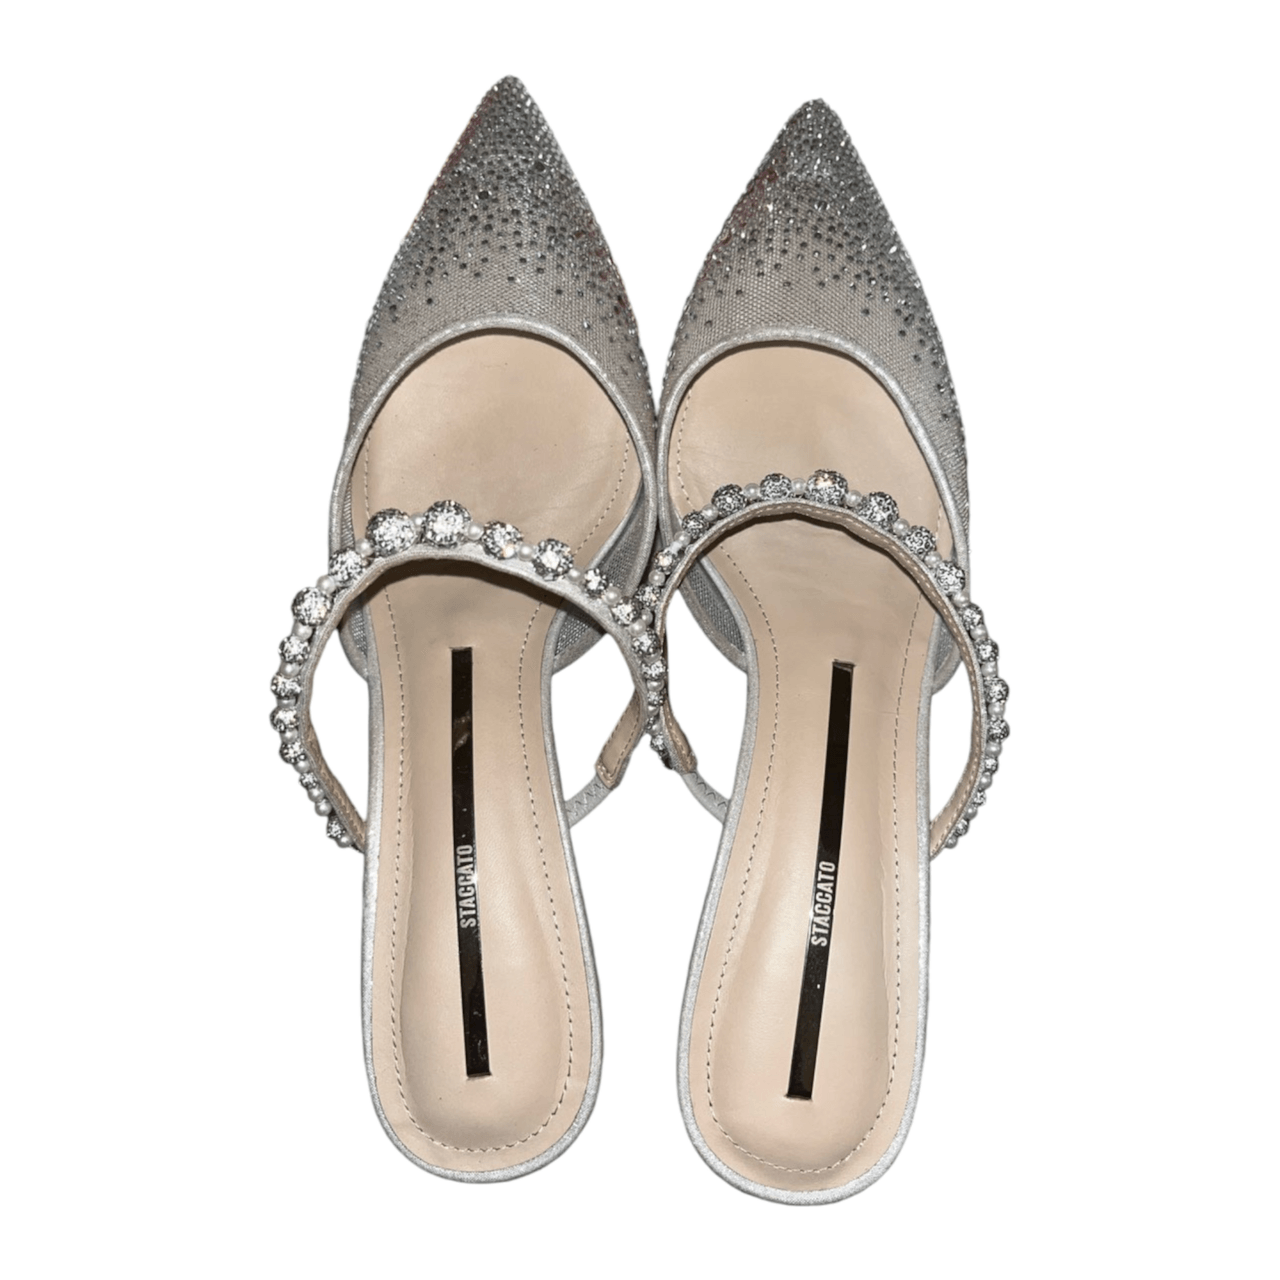 Staccato Silver Heels